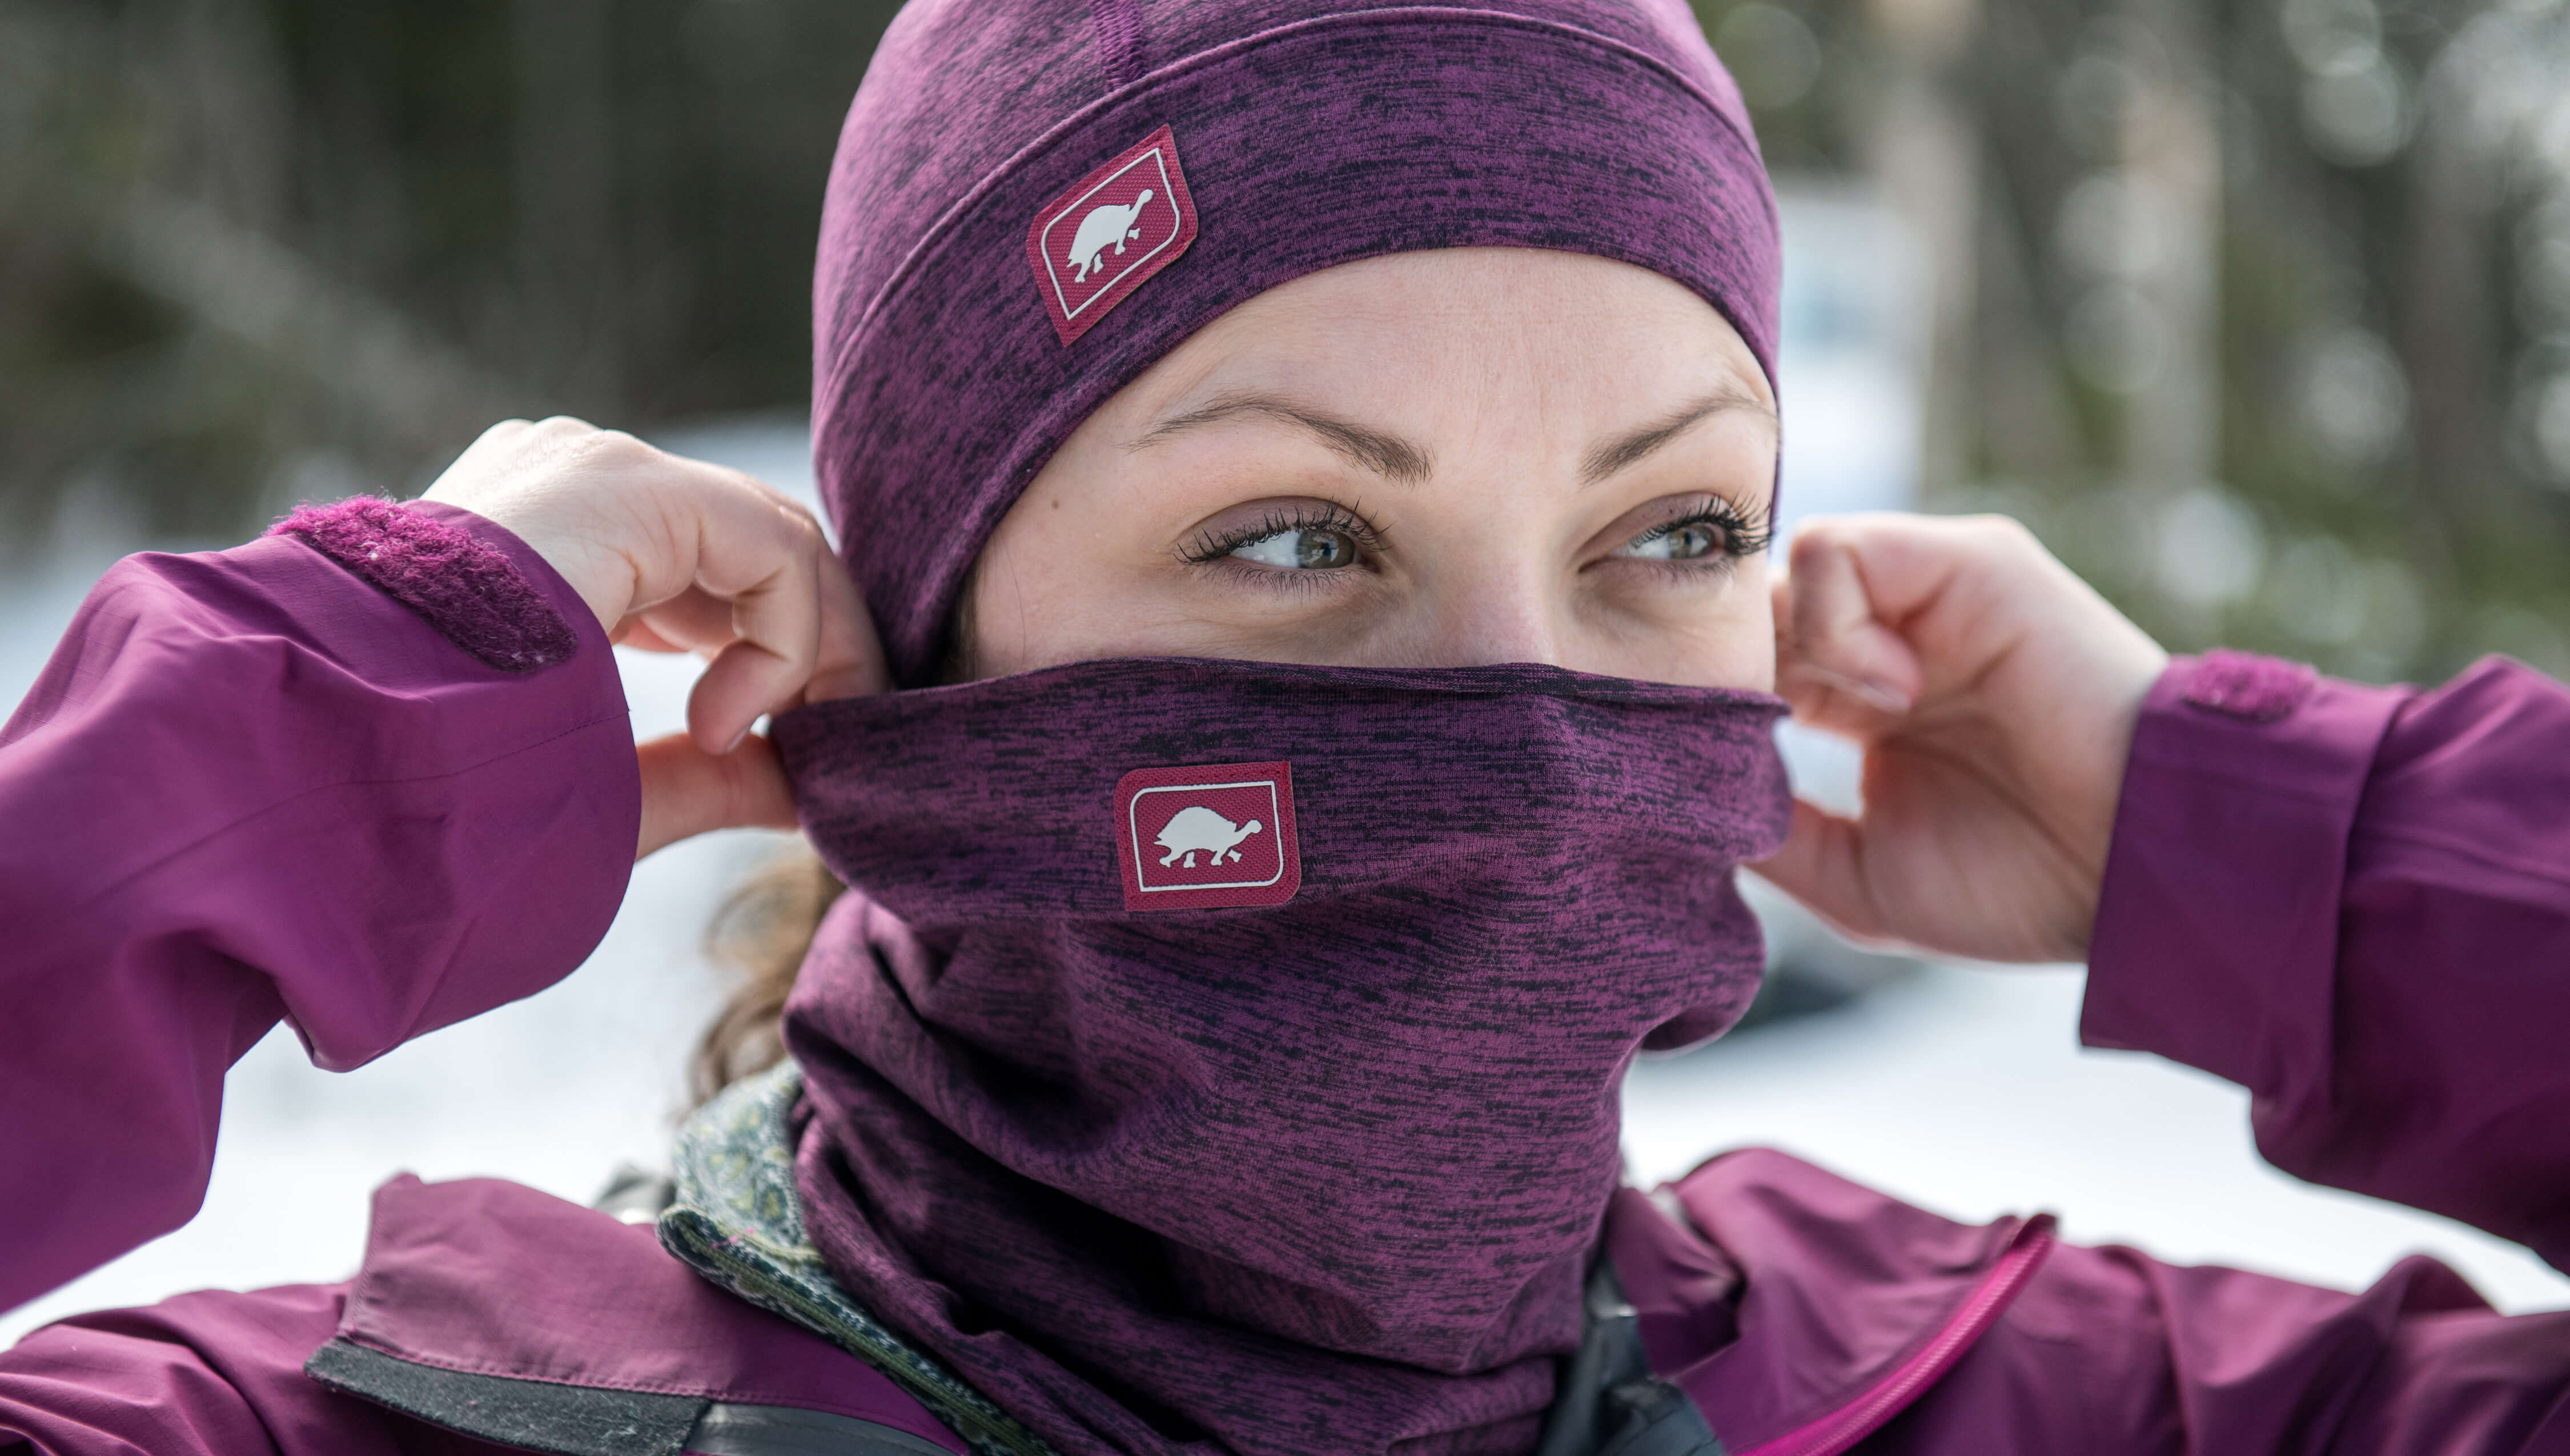 Comfort Shell totally Tubular, buffs for skiers, neck warmers for snowboarders, buffs for runners